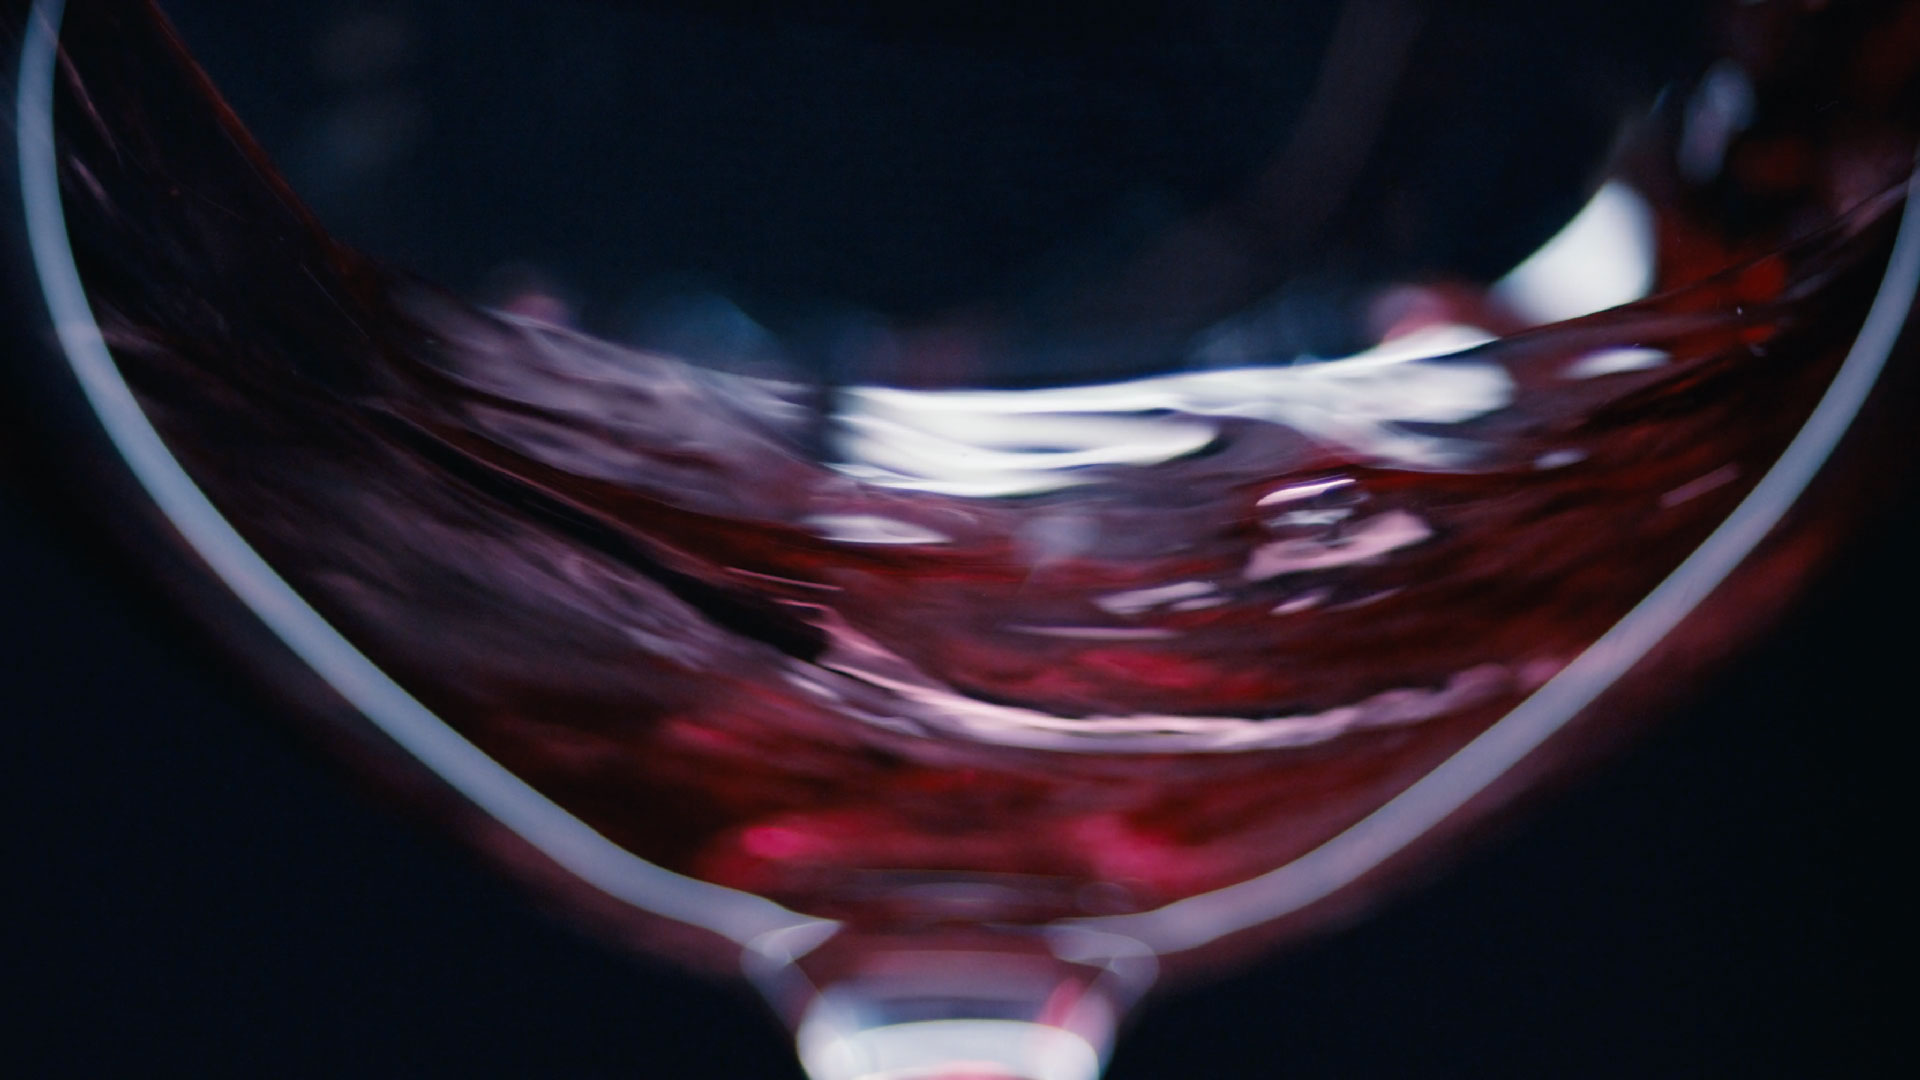 Wax Appeal: Belle Glos Pinot Noir | Affinity Creative Group